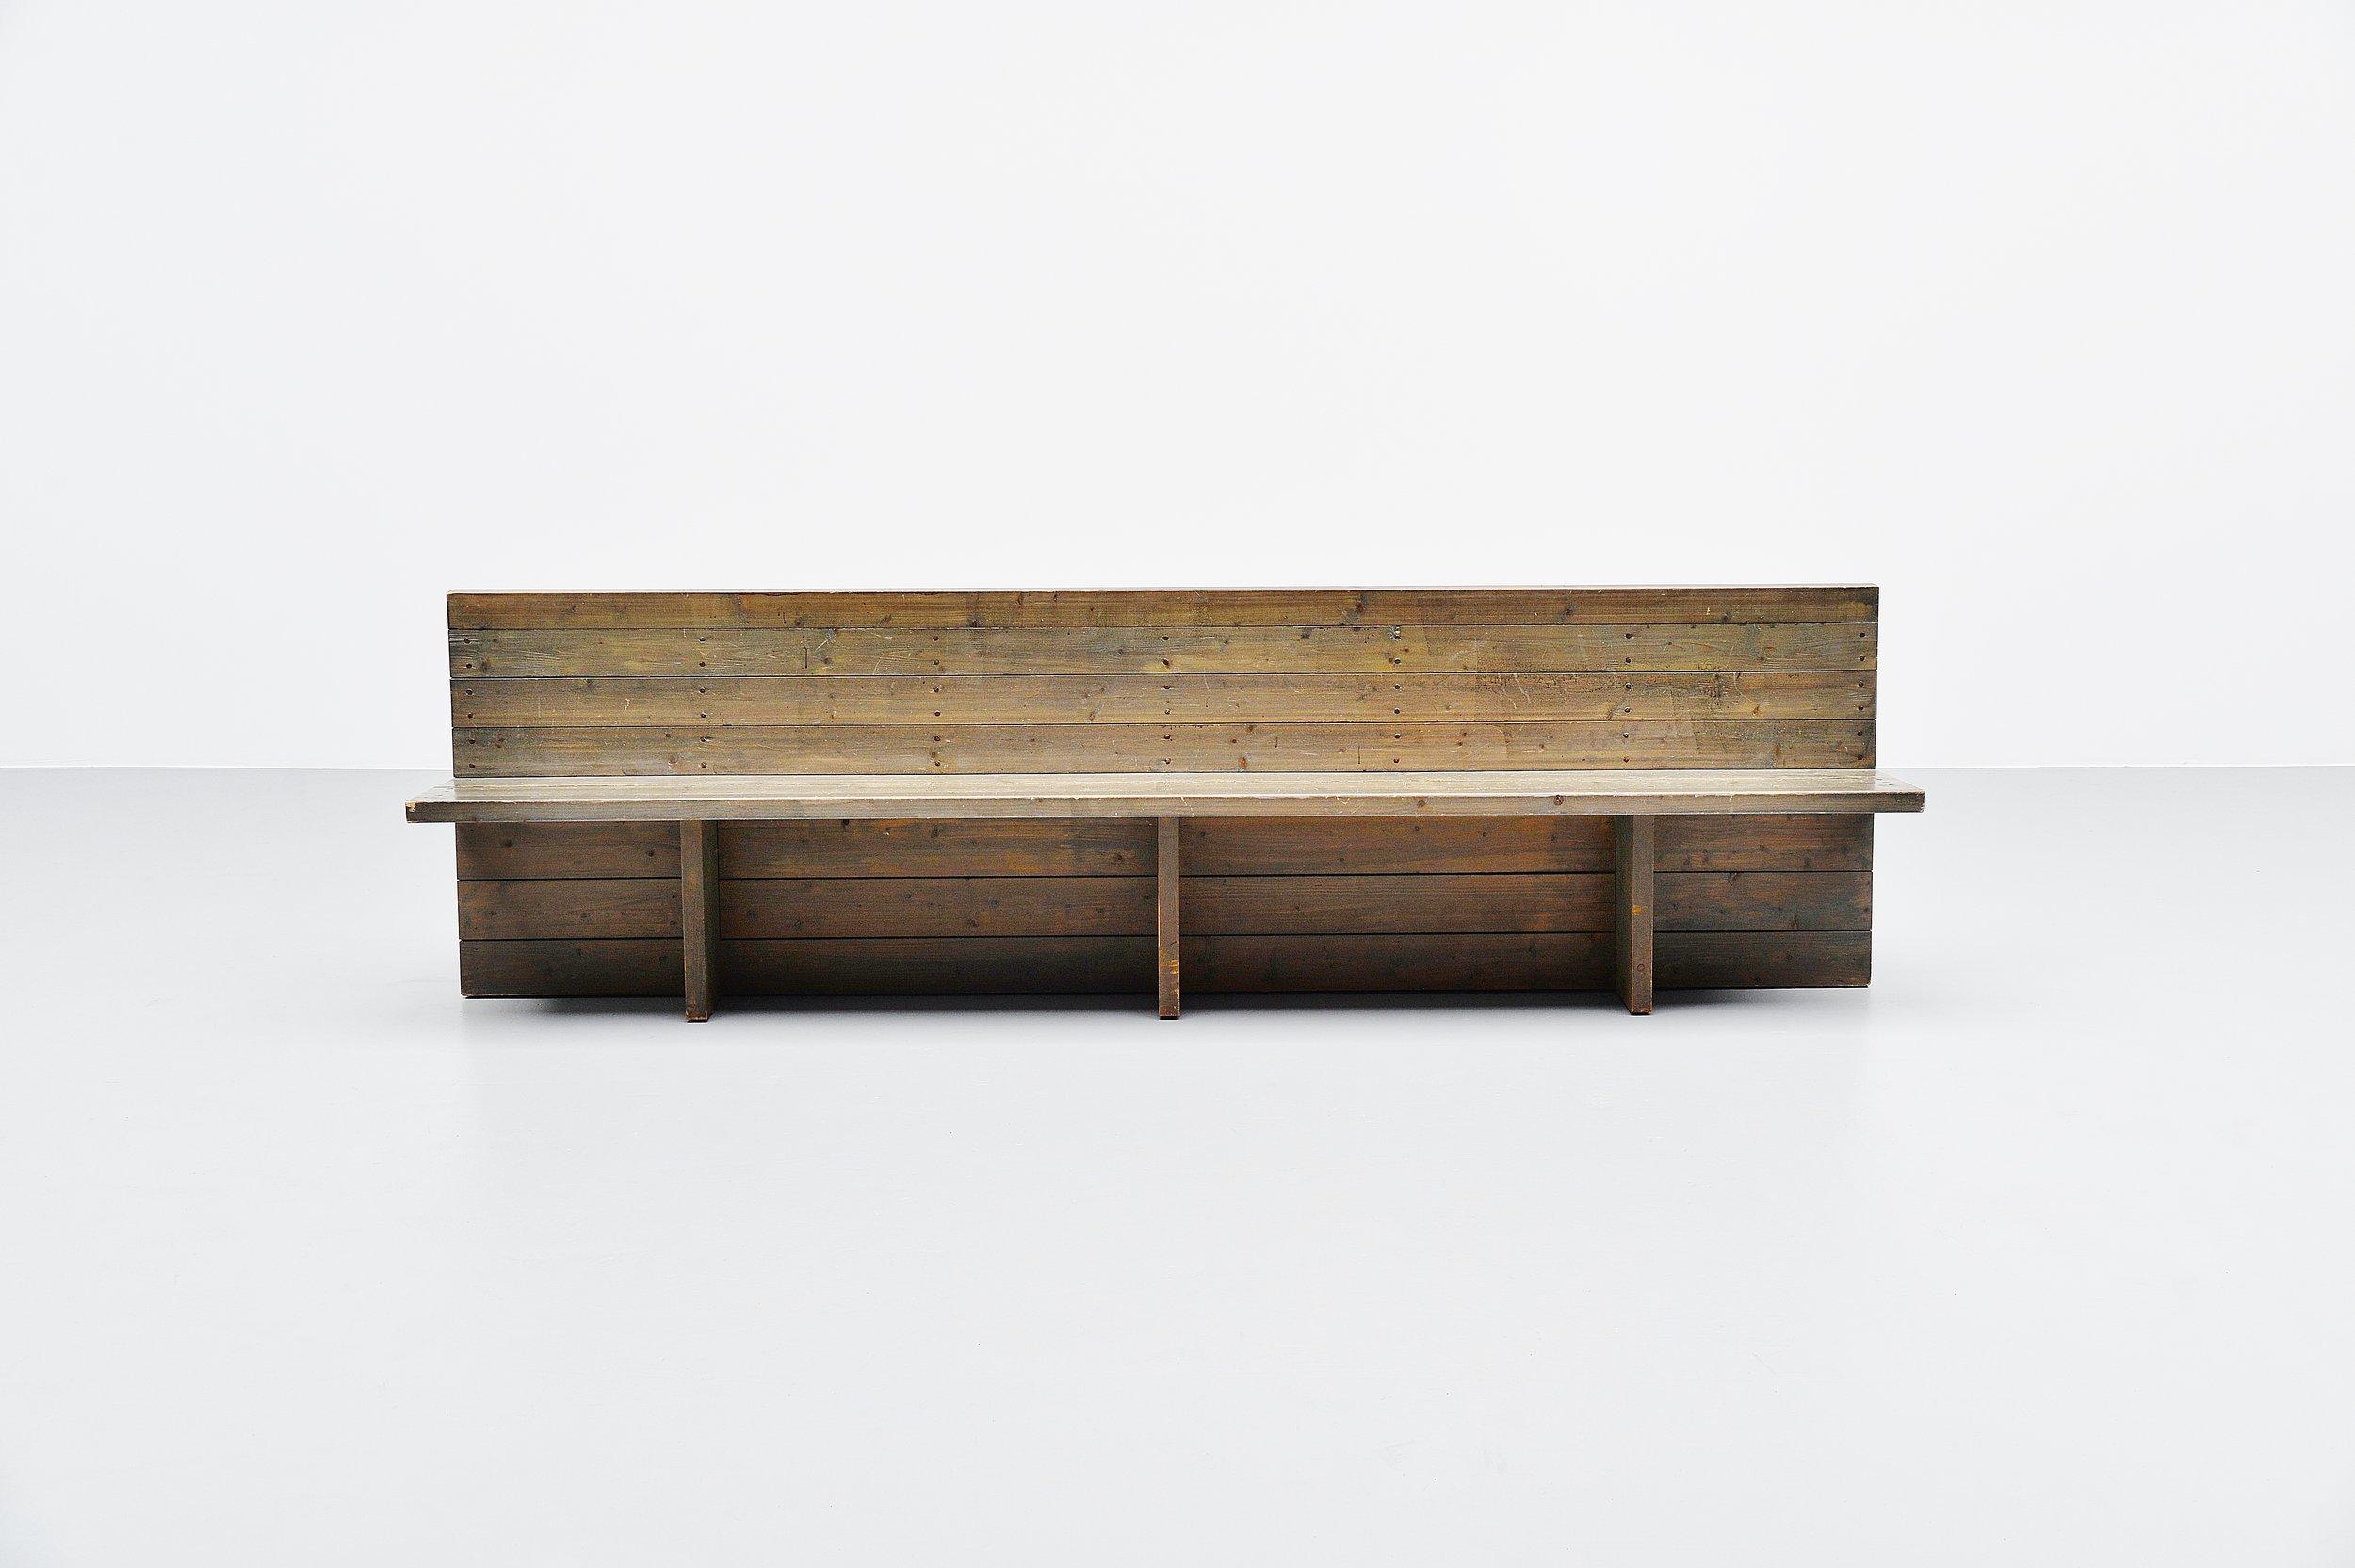 Rare long bench designed by Dom Hans van der Laan and executed by Jan de Jong for the Sint-Willibrorduskerk Almelo, 1964. This bench comes from the church who had several of these benches in the interior of which only a few survived probably, have a